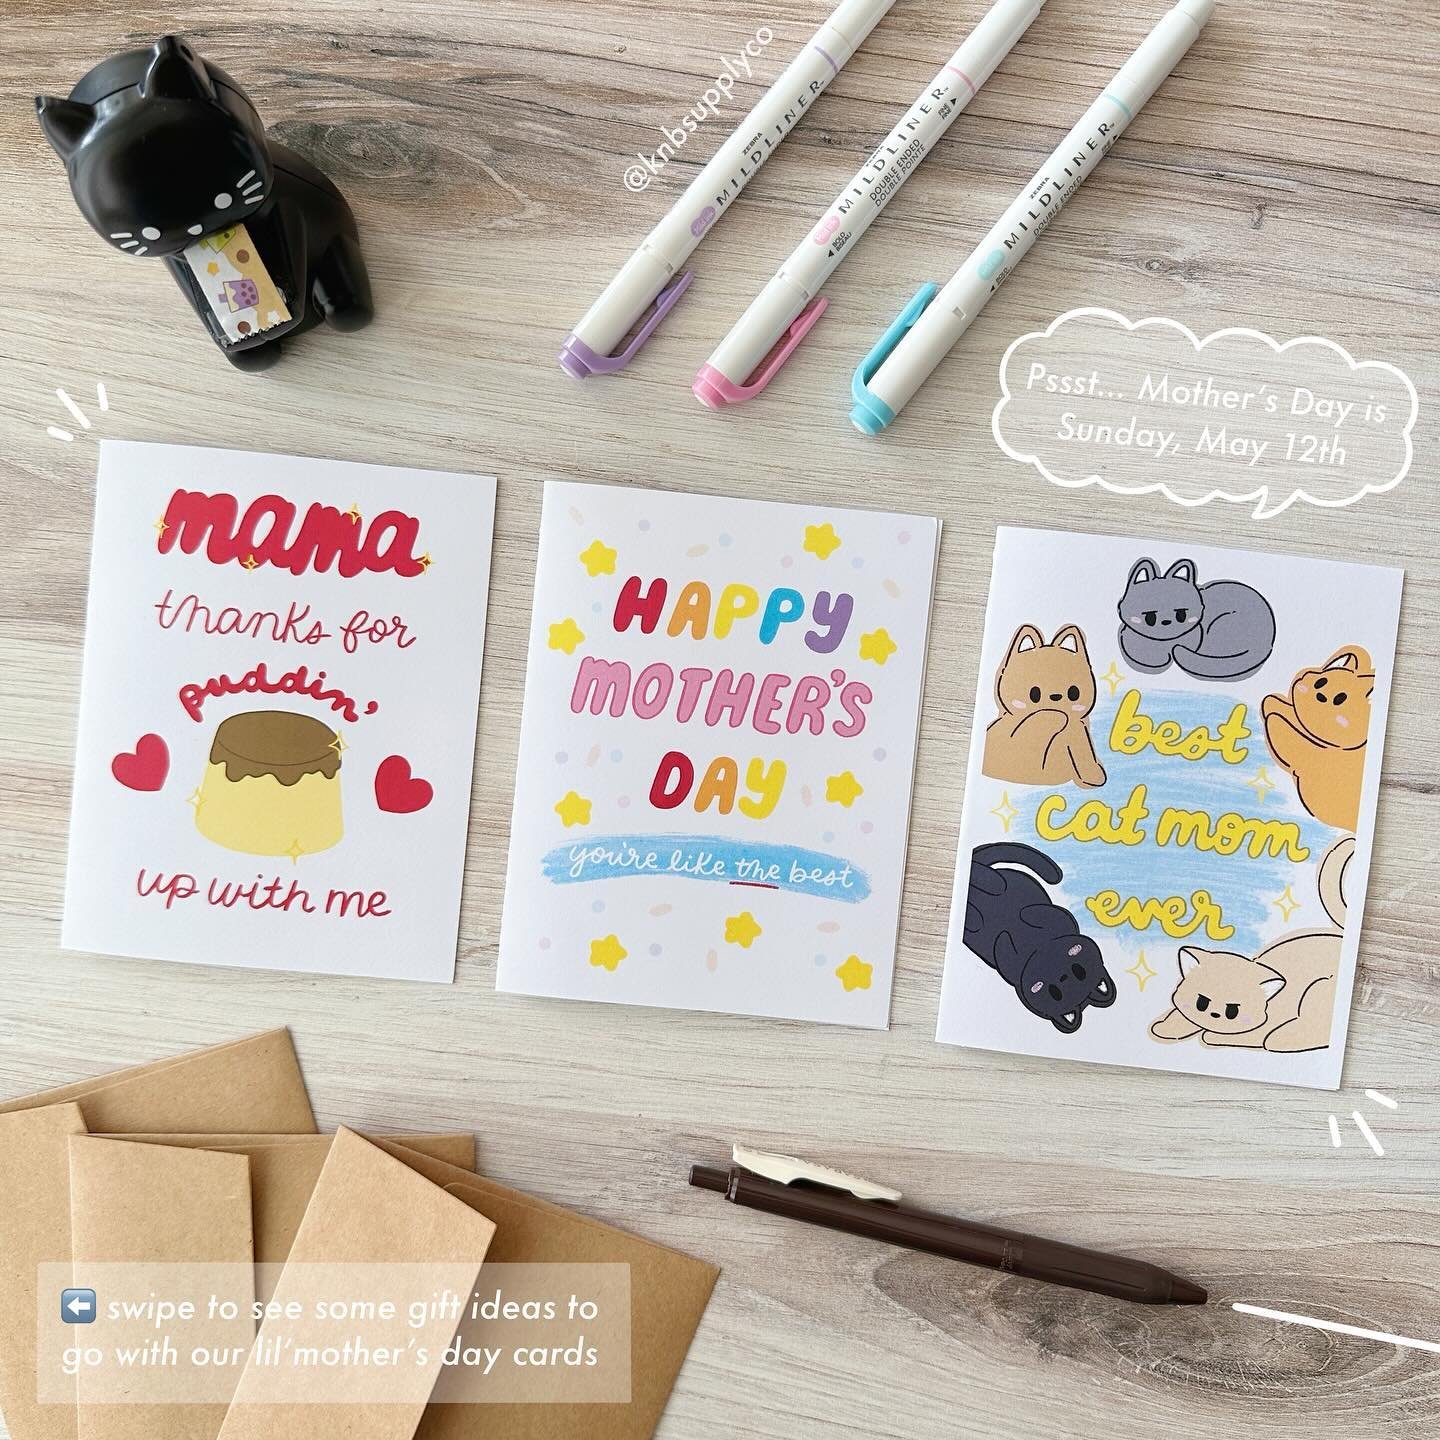 💐 Let them know you appreciate them ~ bringing back our Mother&rsquo;s Day greeting cards (unfortunately I didn&rsquo;t get to add a dog 🐶 one this year but I hope to be able to in the near future)! 

⬅️ swipe to see some lil&rsquo;gifts ideas that